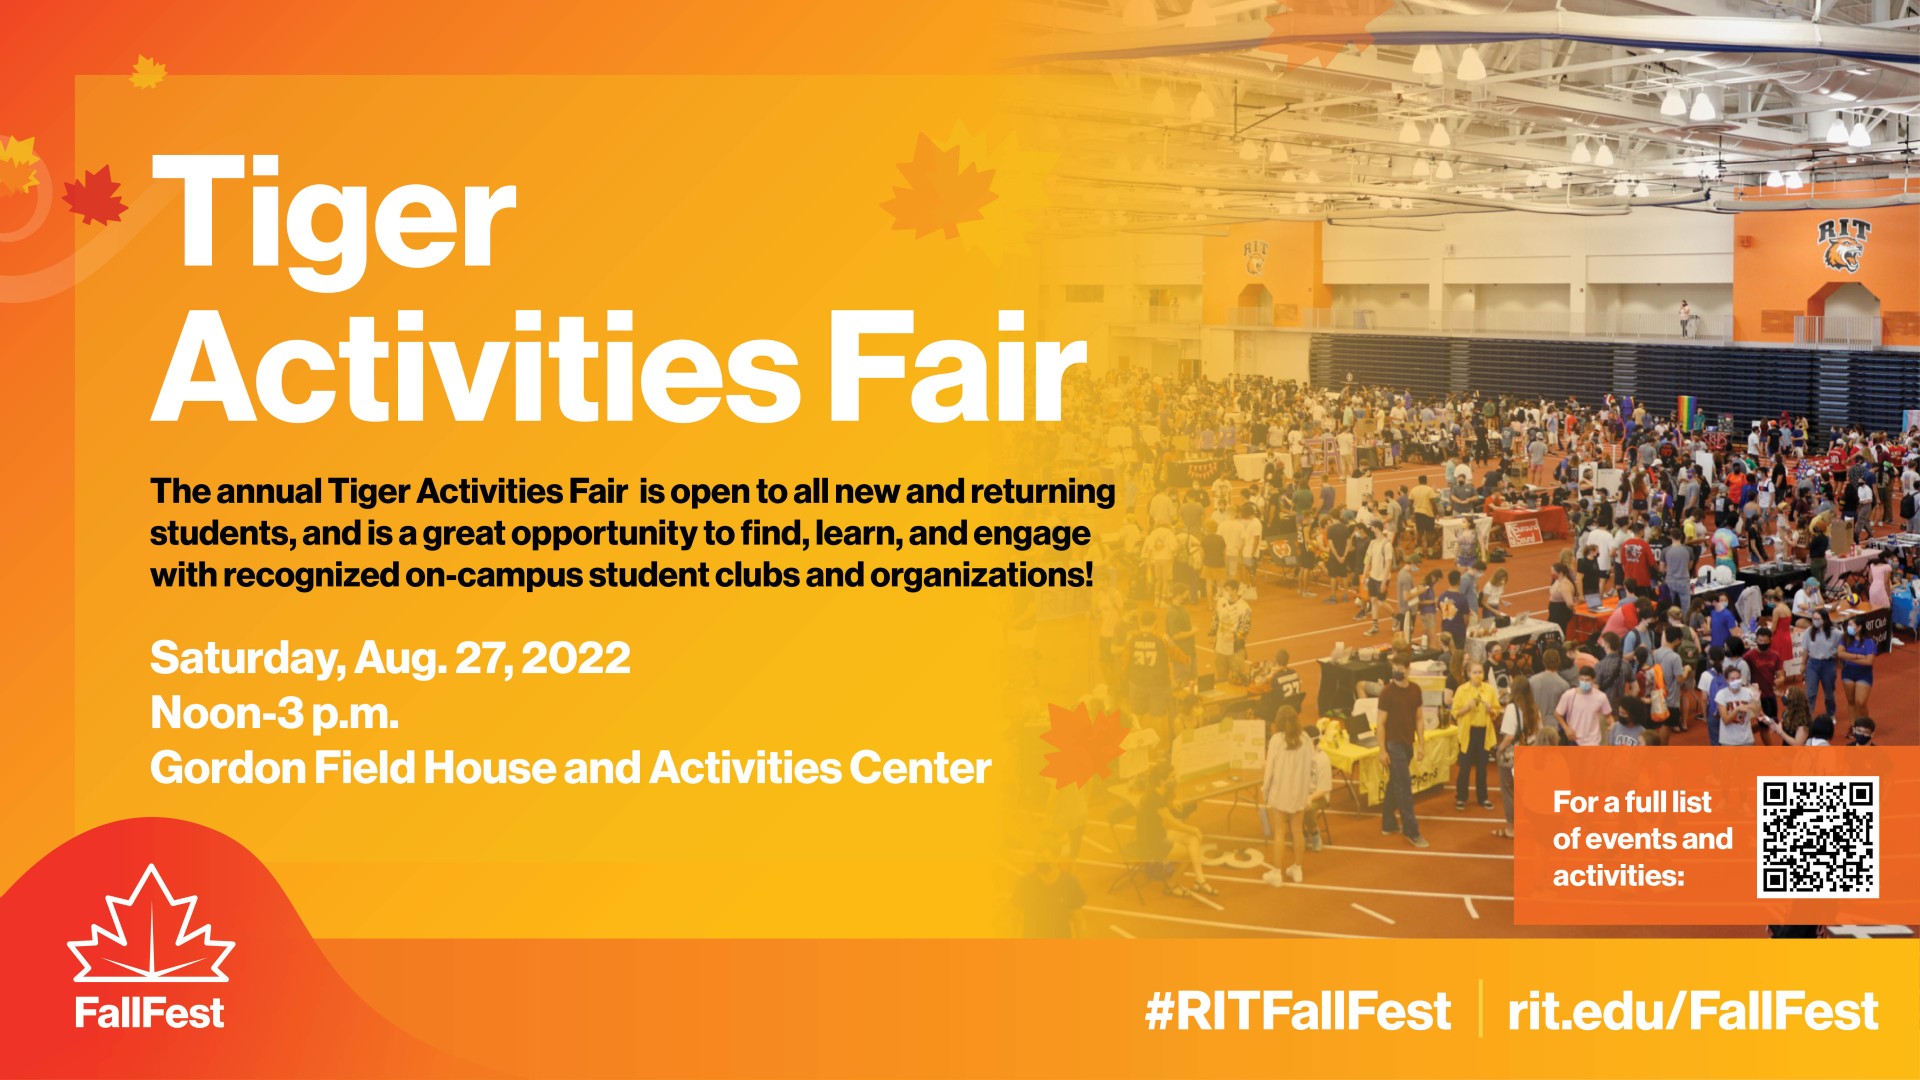 Photo square with orange and yellow background with leaves. Text reads: Tiger Activities Fair. The annual Tiger Activities Fair is open to all new and returning students, and is a great opporunity to find, learn and engage with recognized on-campus student clubs and organizations! Saturday, August 27, 2022, Noon-3:00pm, Gordon Field House and Activities Center